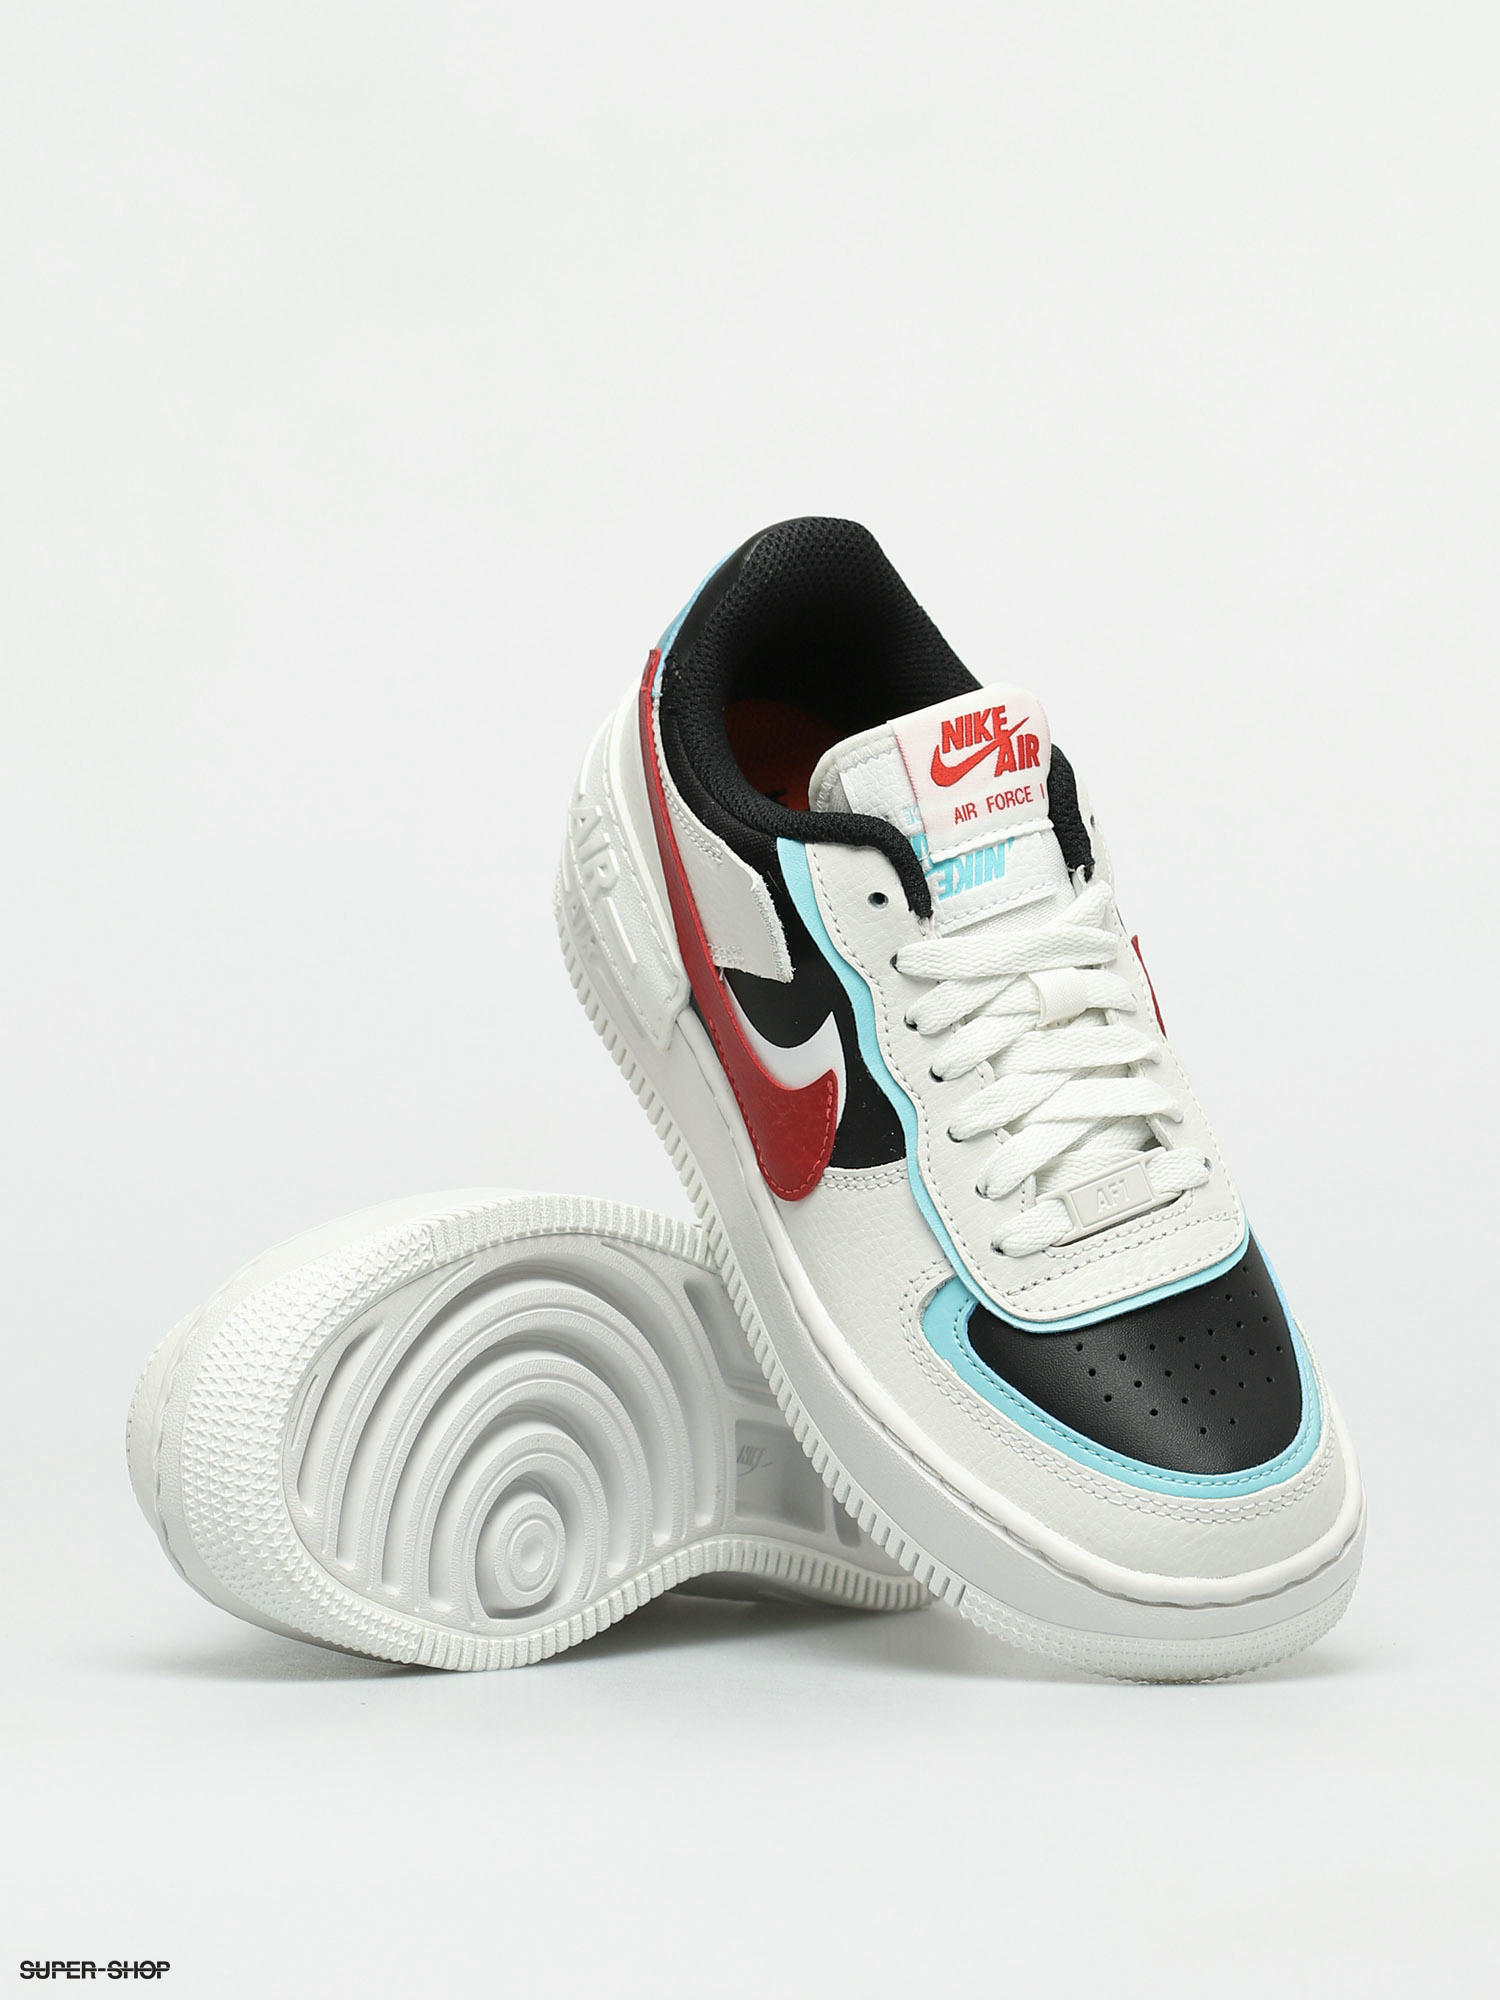 Nike Af1 Shadow Shoes Wmn (summit white/chile red bleached aqua)